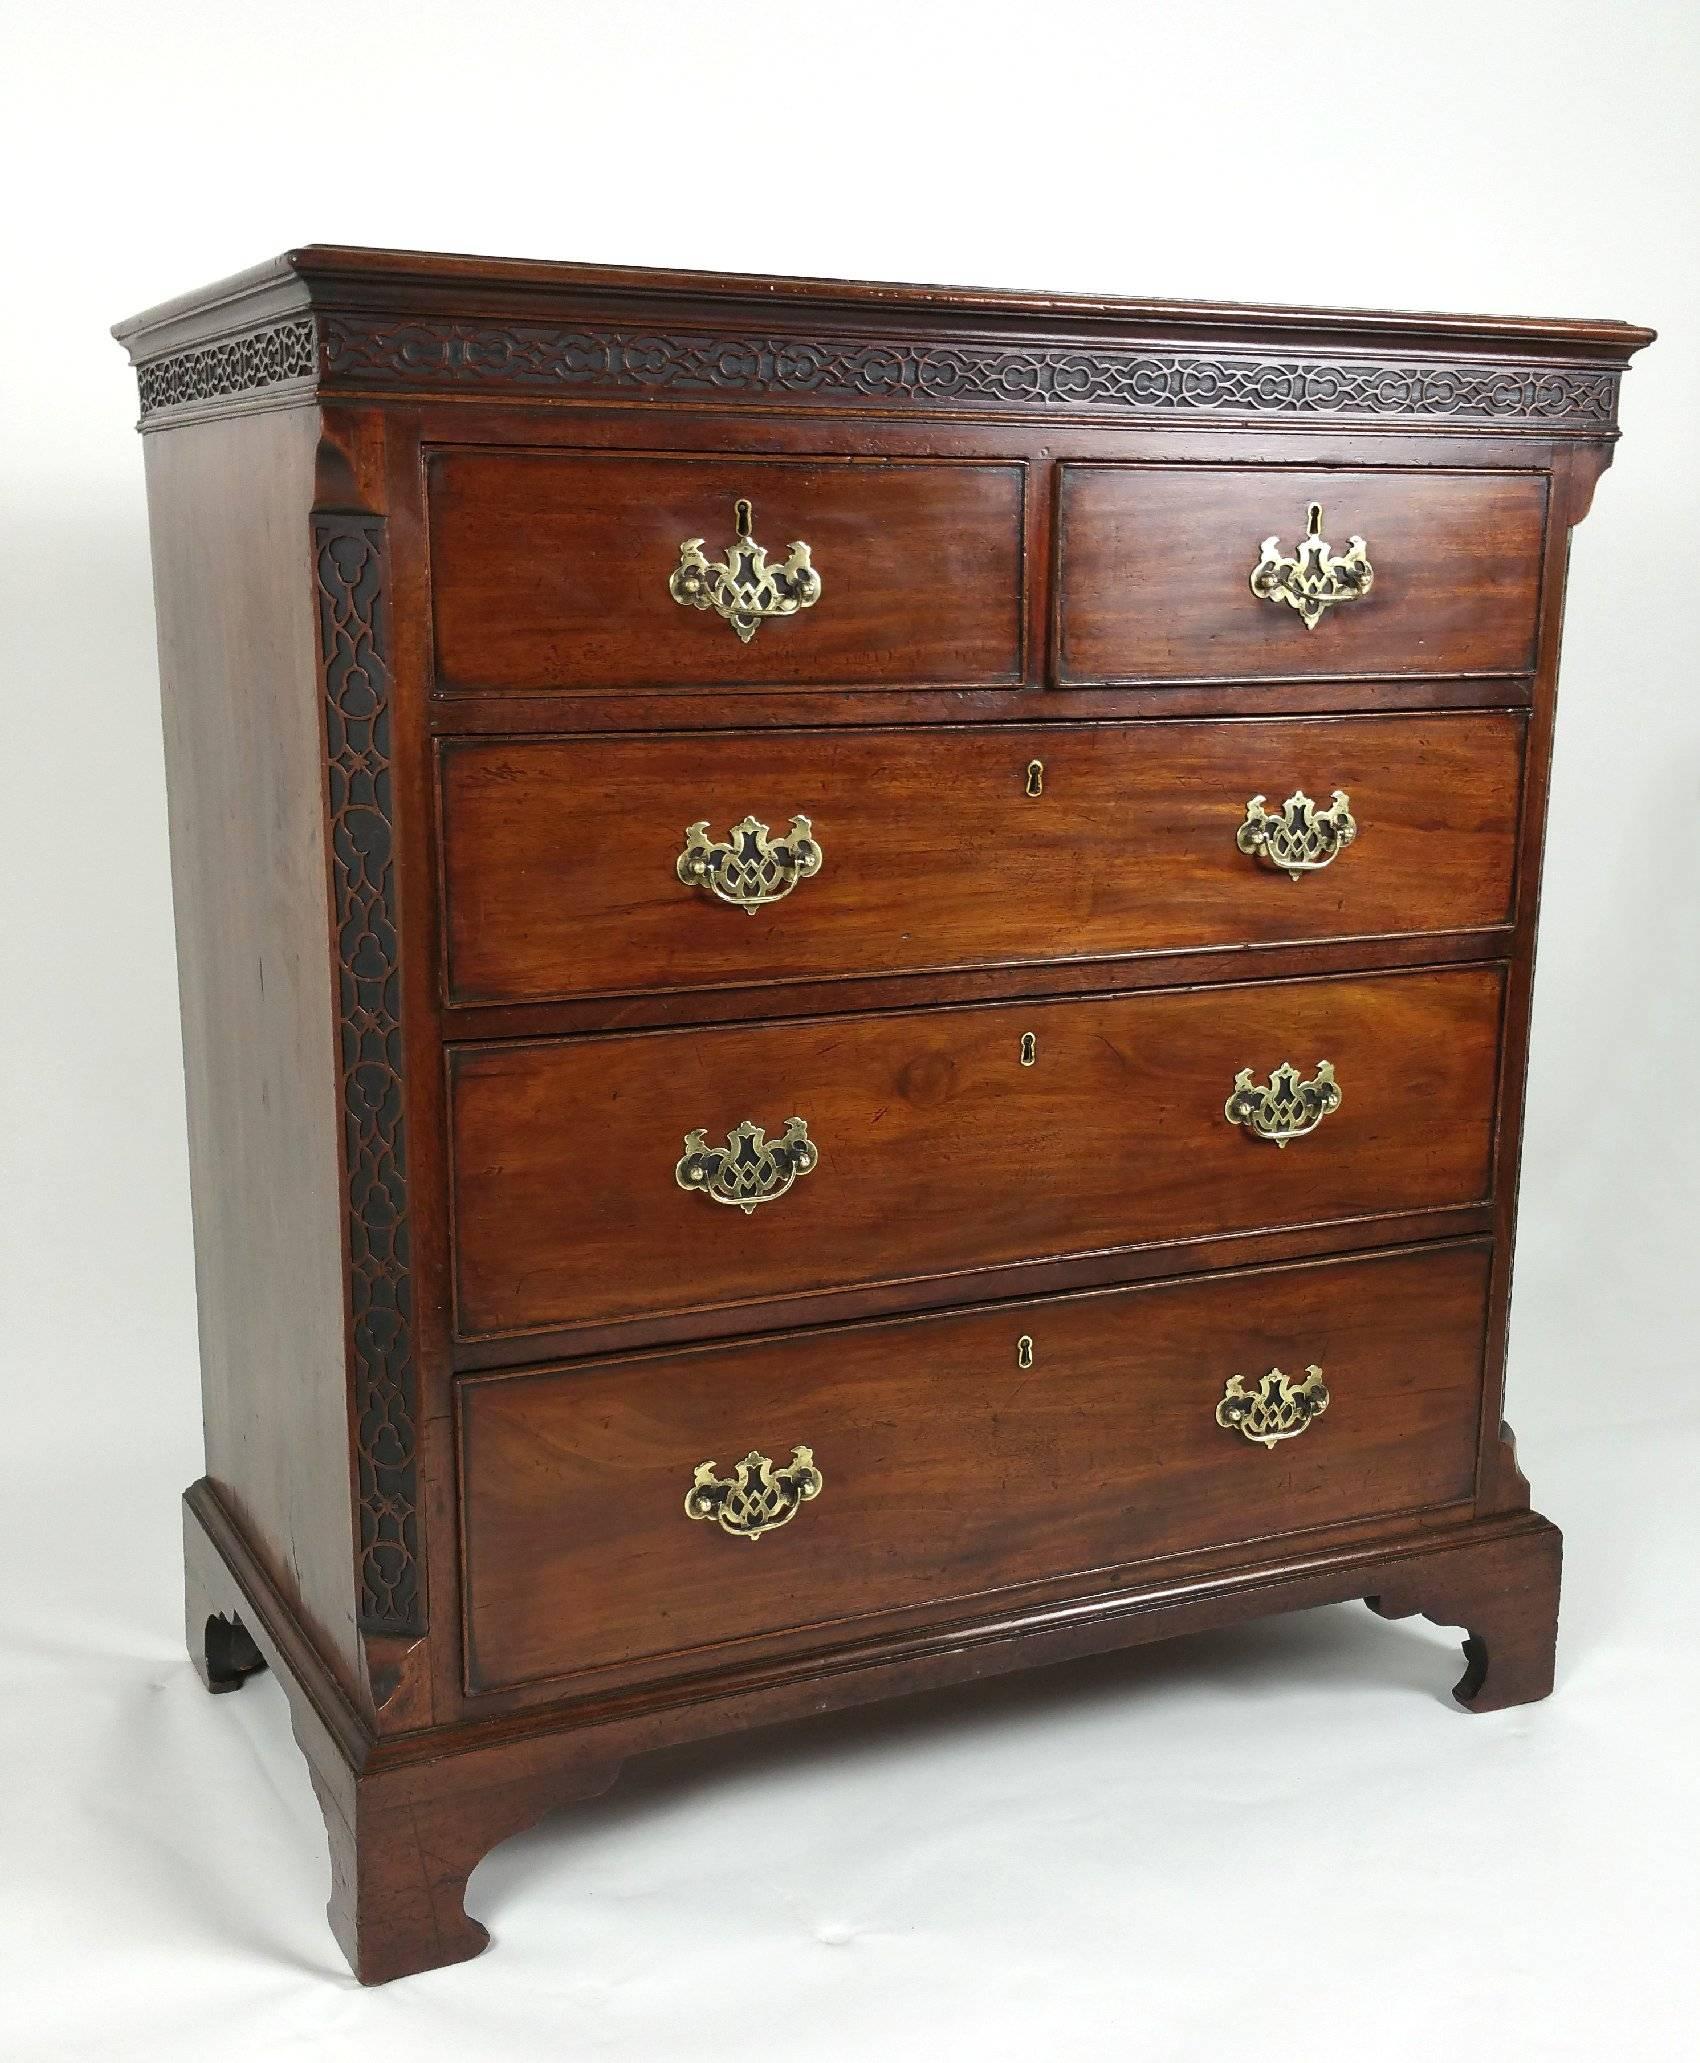 This marvelous 18th century Chippendale mahogany chest features two short over three long slightly graduating drawers with blind fret decoration around the top and along both front sides. The chest stands on bracket feet and is designed with canted